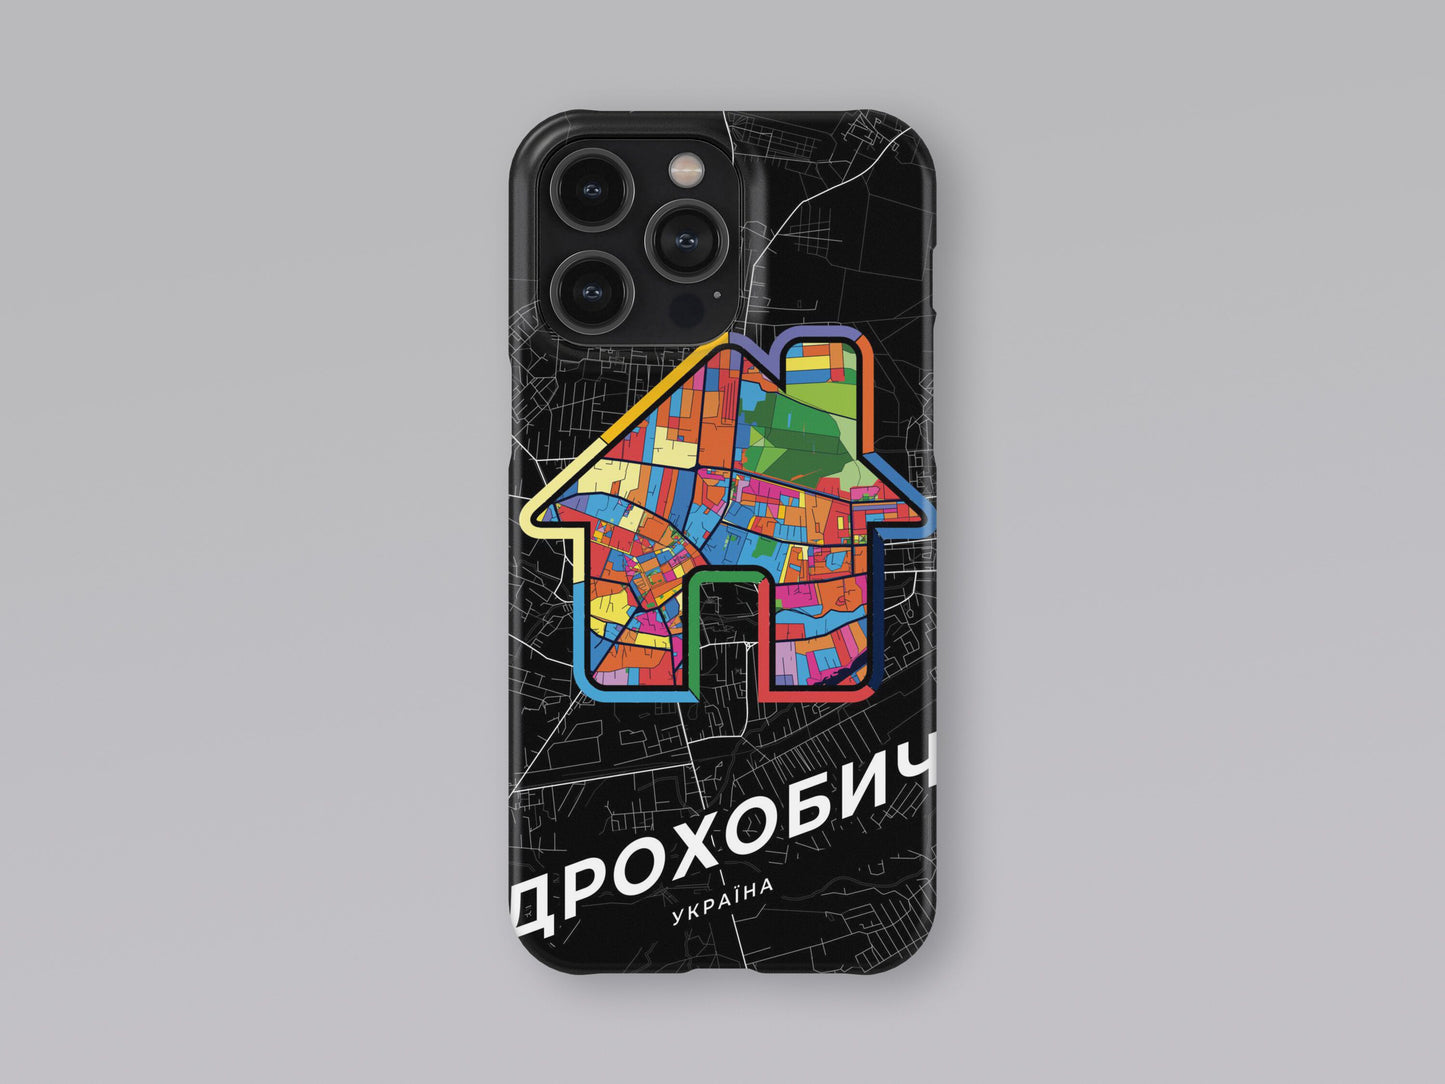 Drohobych Ukraine slim phone case with colorful icon. Birthday, wedding or housewarming gift. Couple match cases. 3